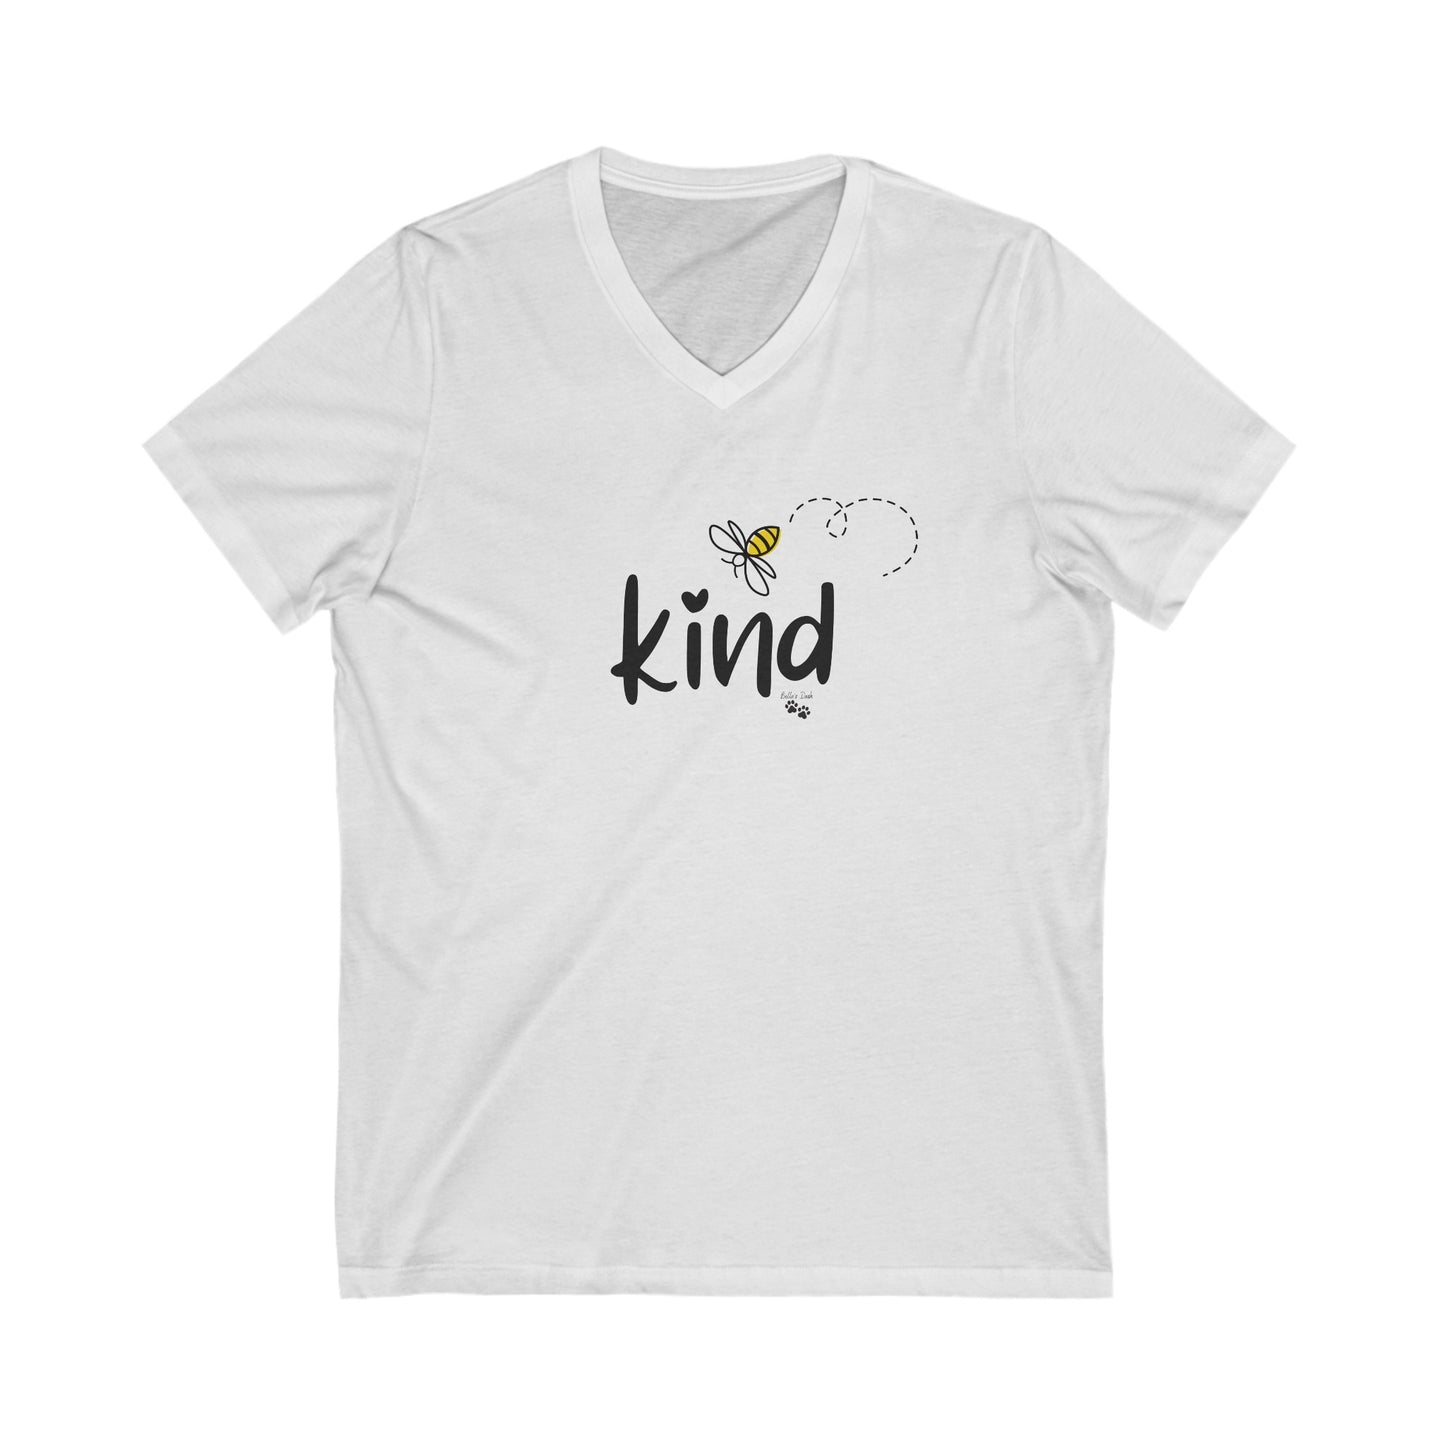 Bee (Be) Kind Cotton Graphic V-Neck Tee for Women